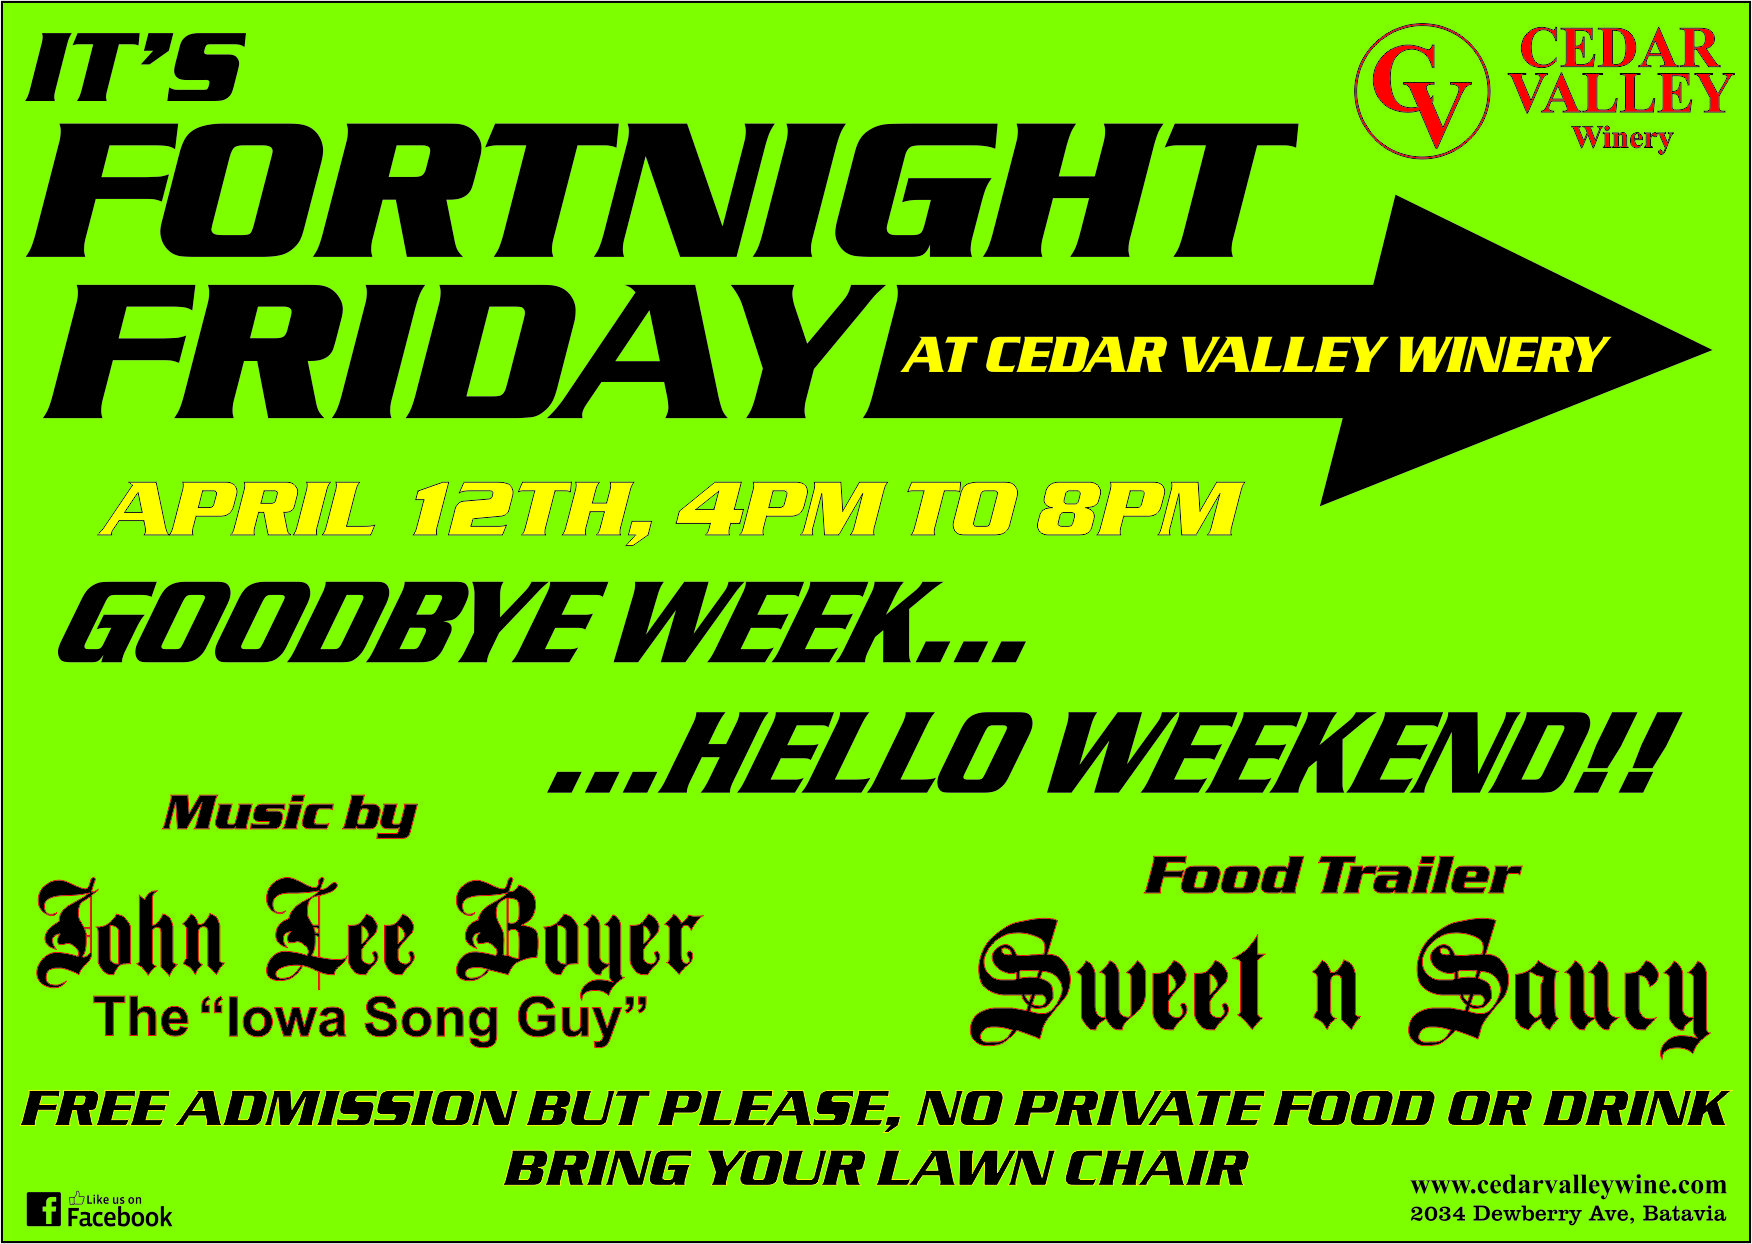 <h1 class="tribe-events-single-event-title">Cedar Valley Winery Fortnight Friday</h1>